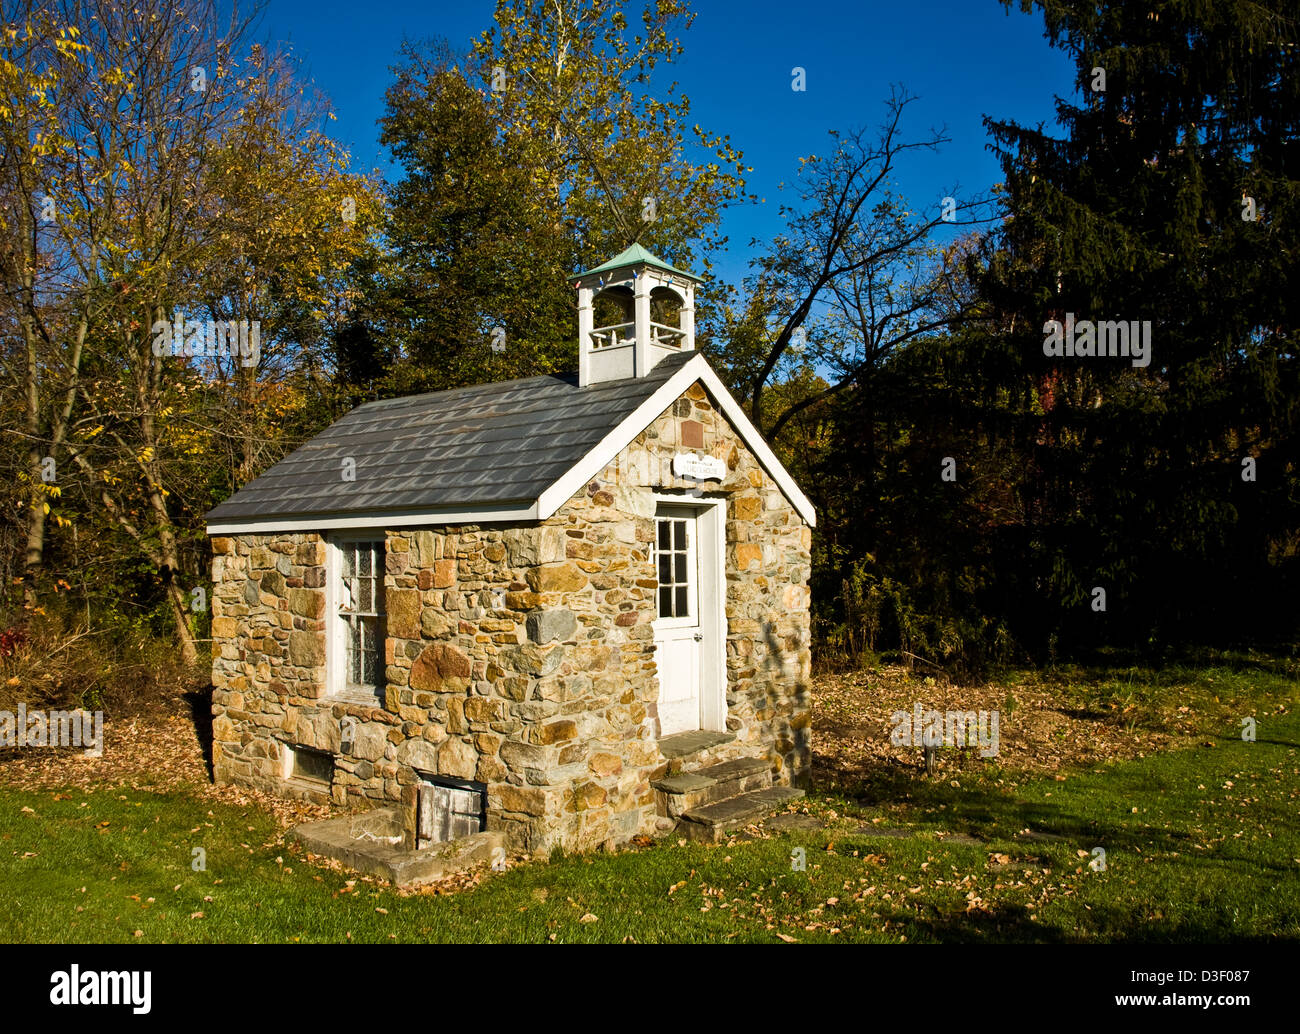 Historic Perryville one room schoolhouse exterior with a stonework exterior in Perryville, New Jersey, Hunterdon County,  NJ, USA historical images Stock Photo